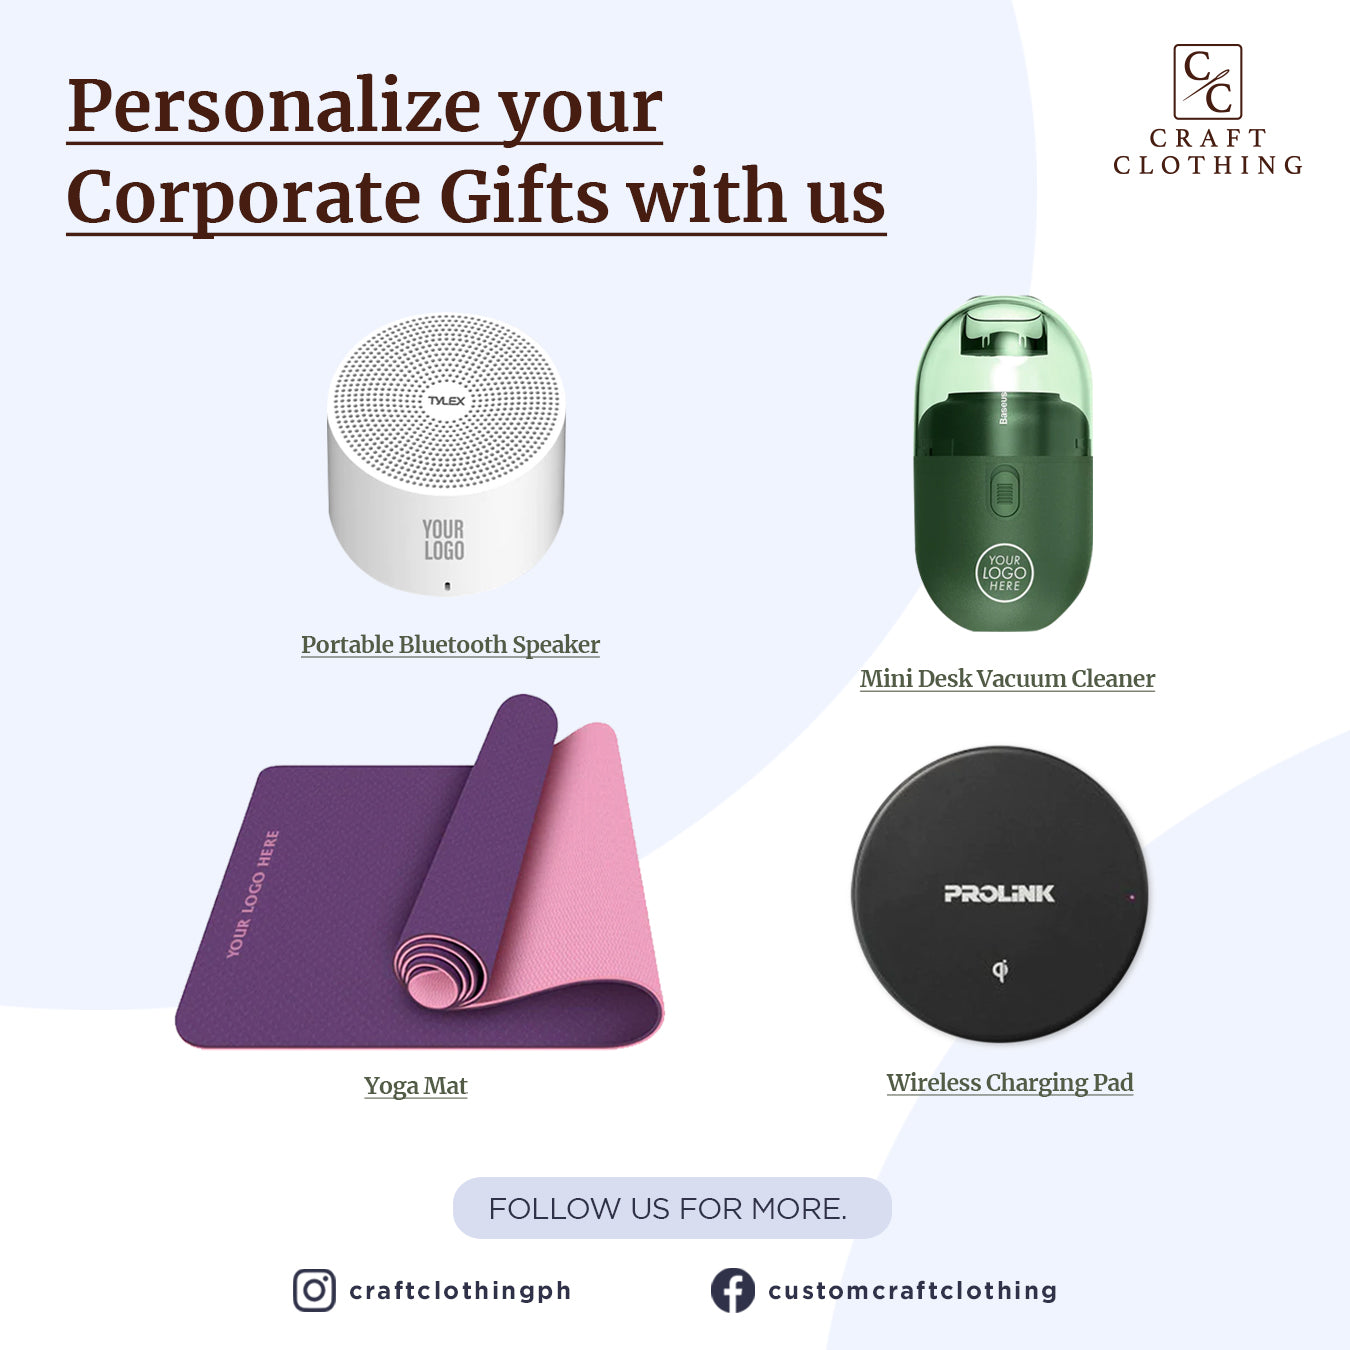 Personalize your Corporate Gifts with us